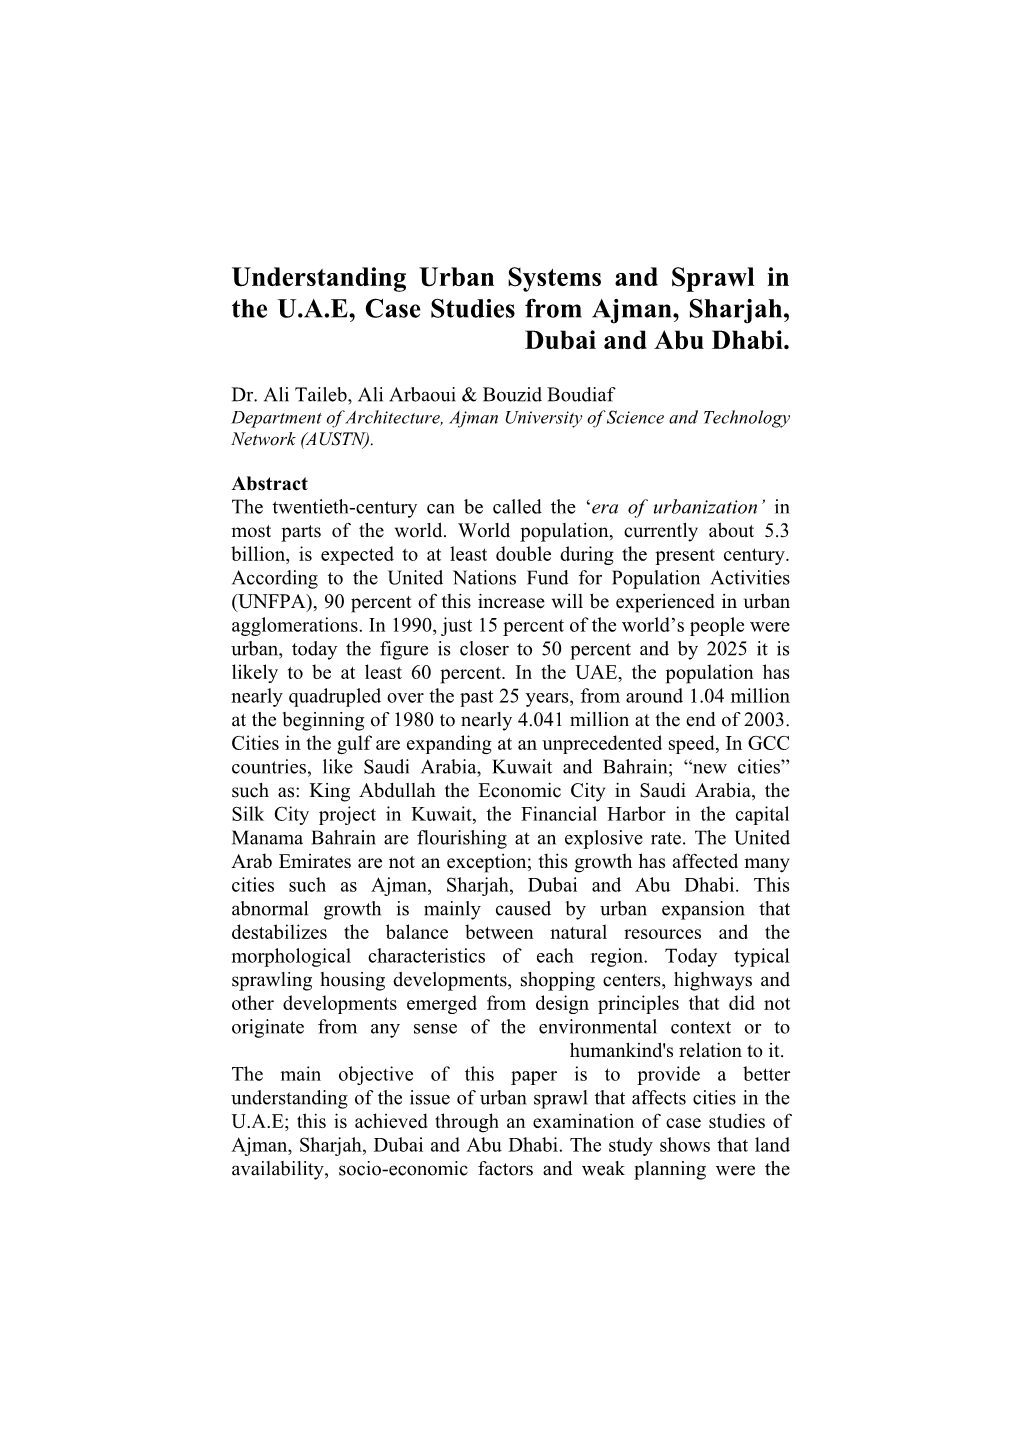 Understanding Urban Systems and Sprawl in the U.A.E, Case Studies from Ajman, Sharjah, Dubai and Abu Dhabi